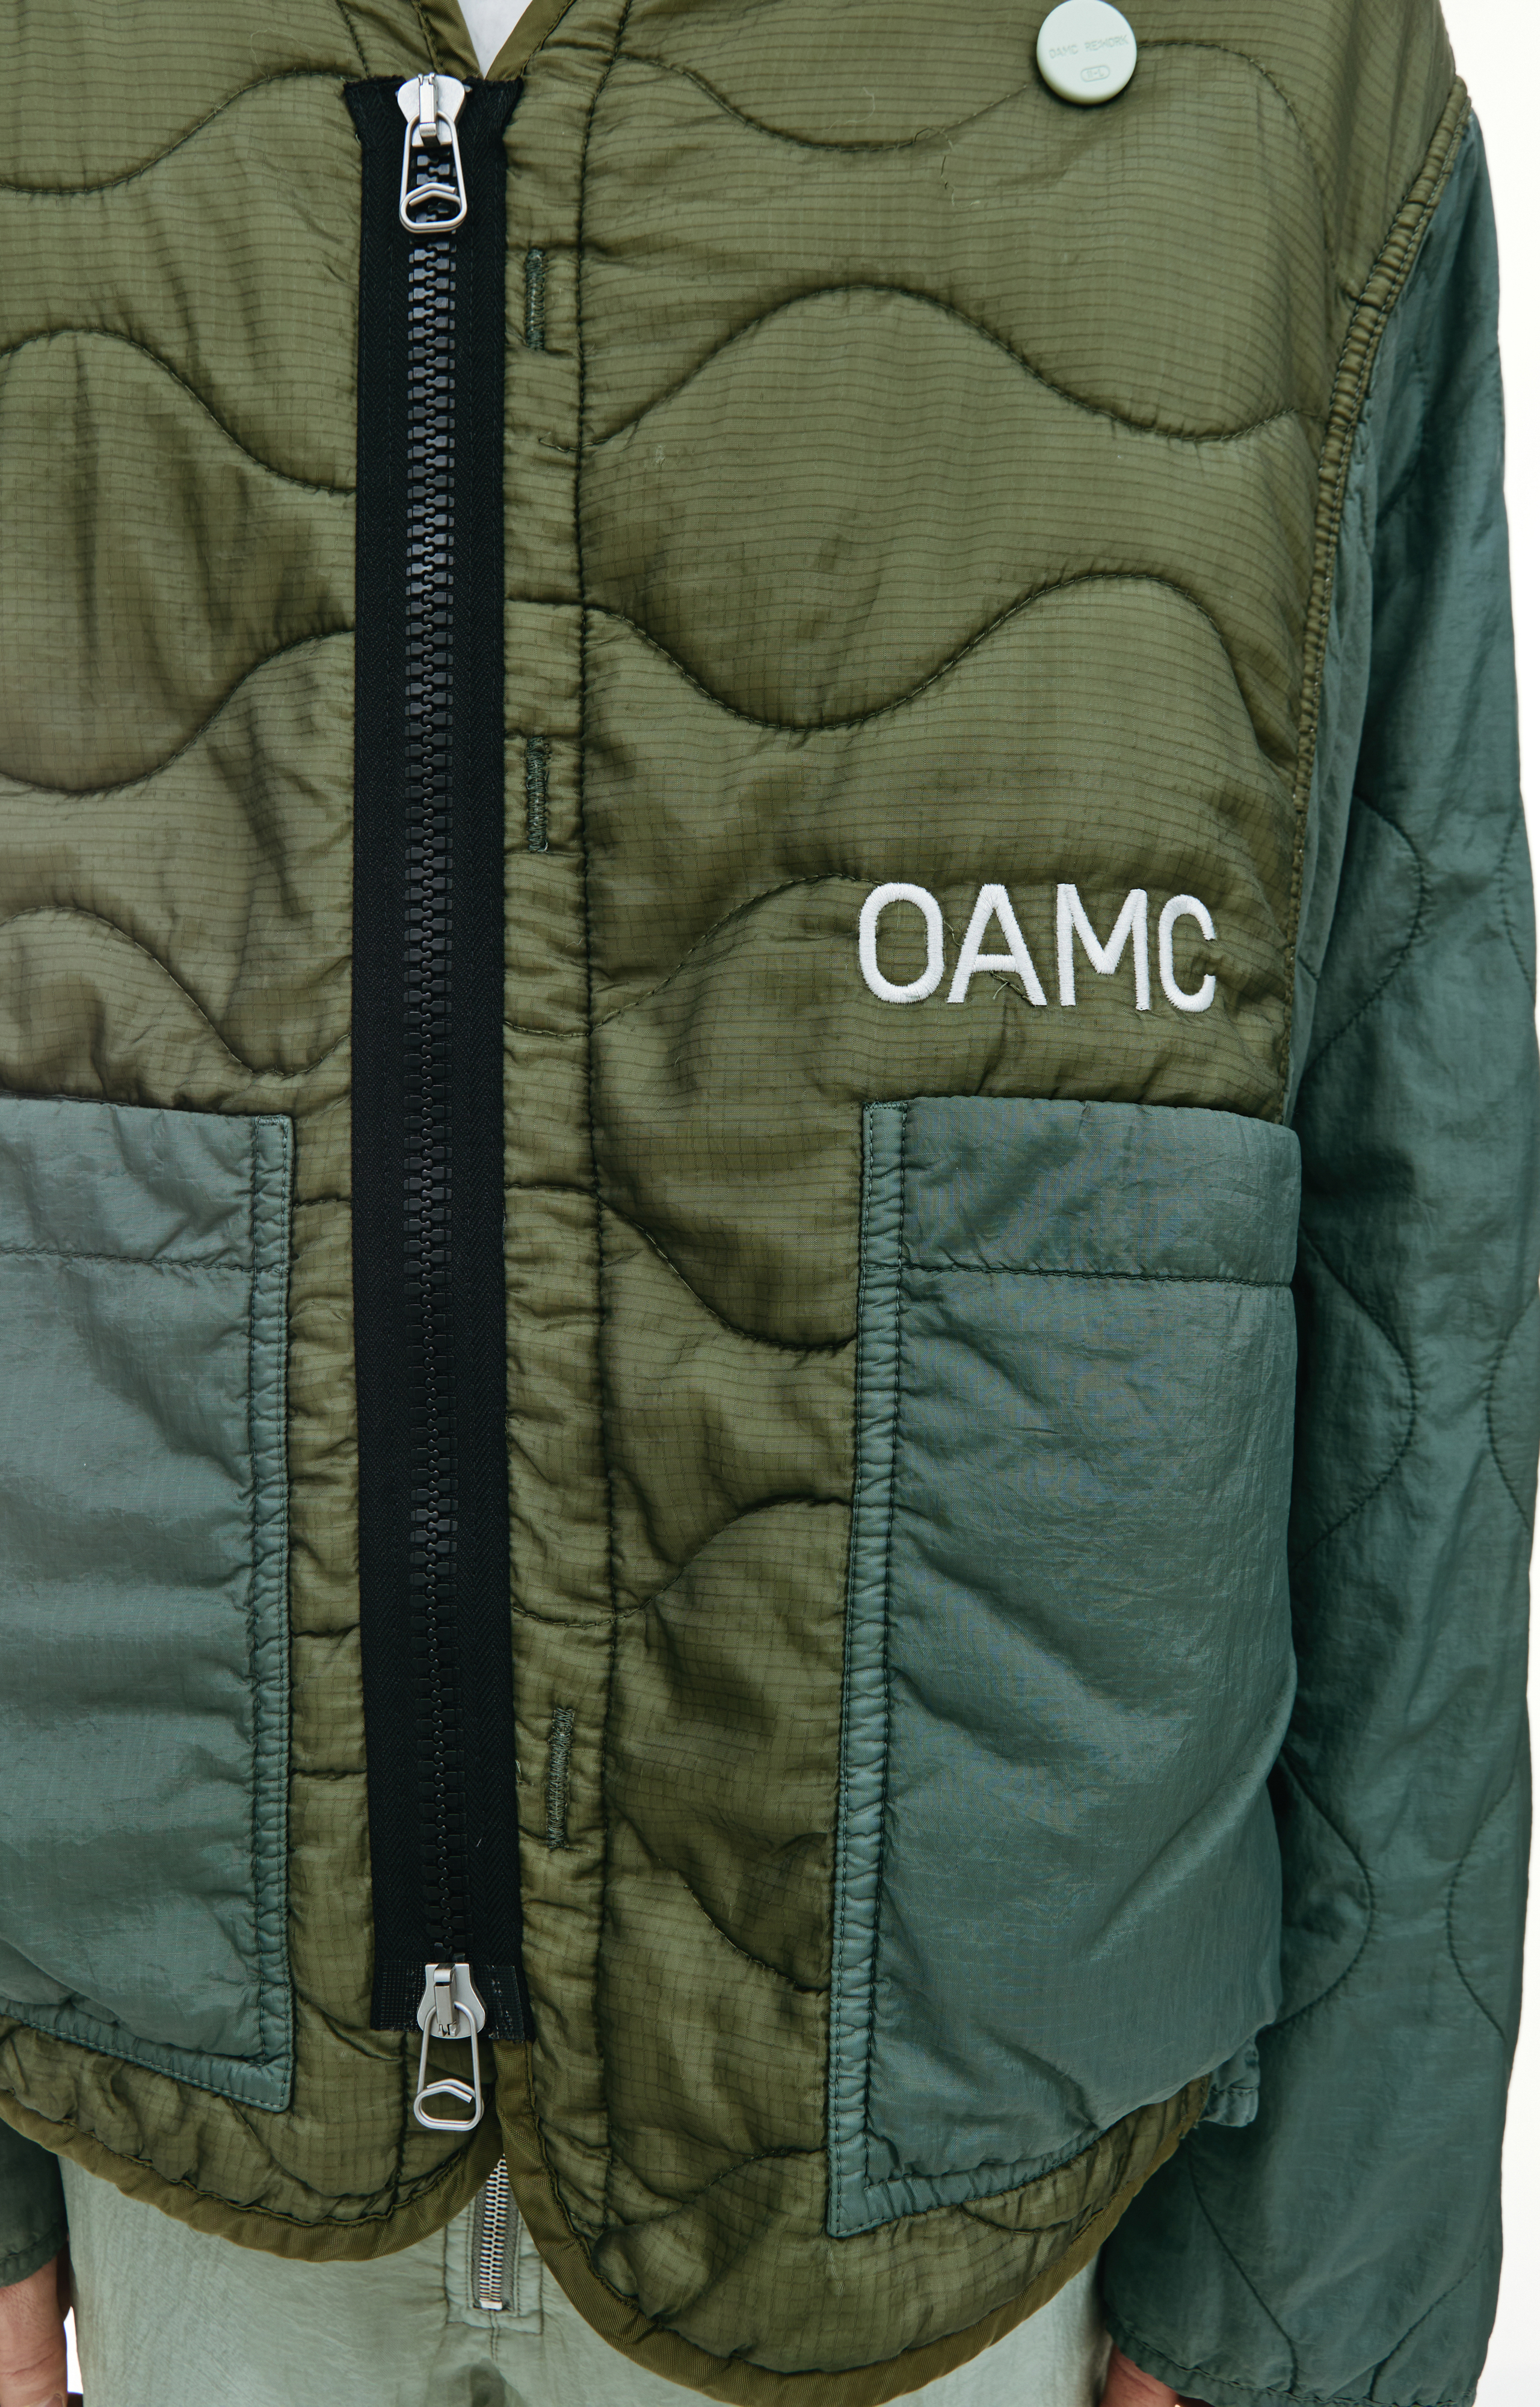 Re:Work Peacemaker quilted jacket